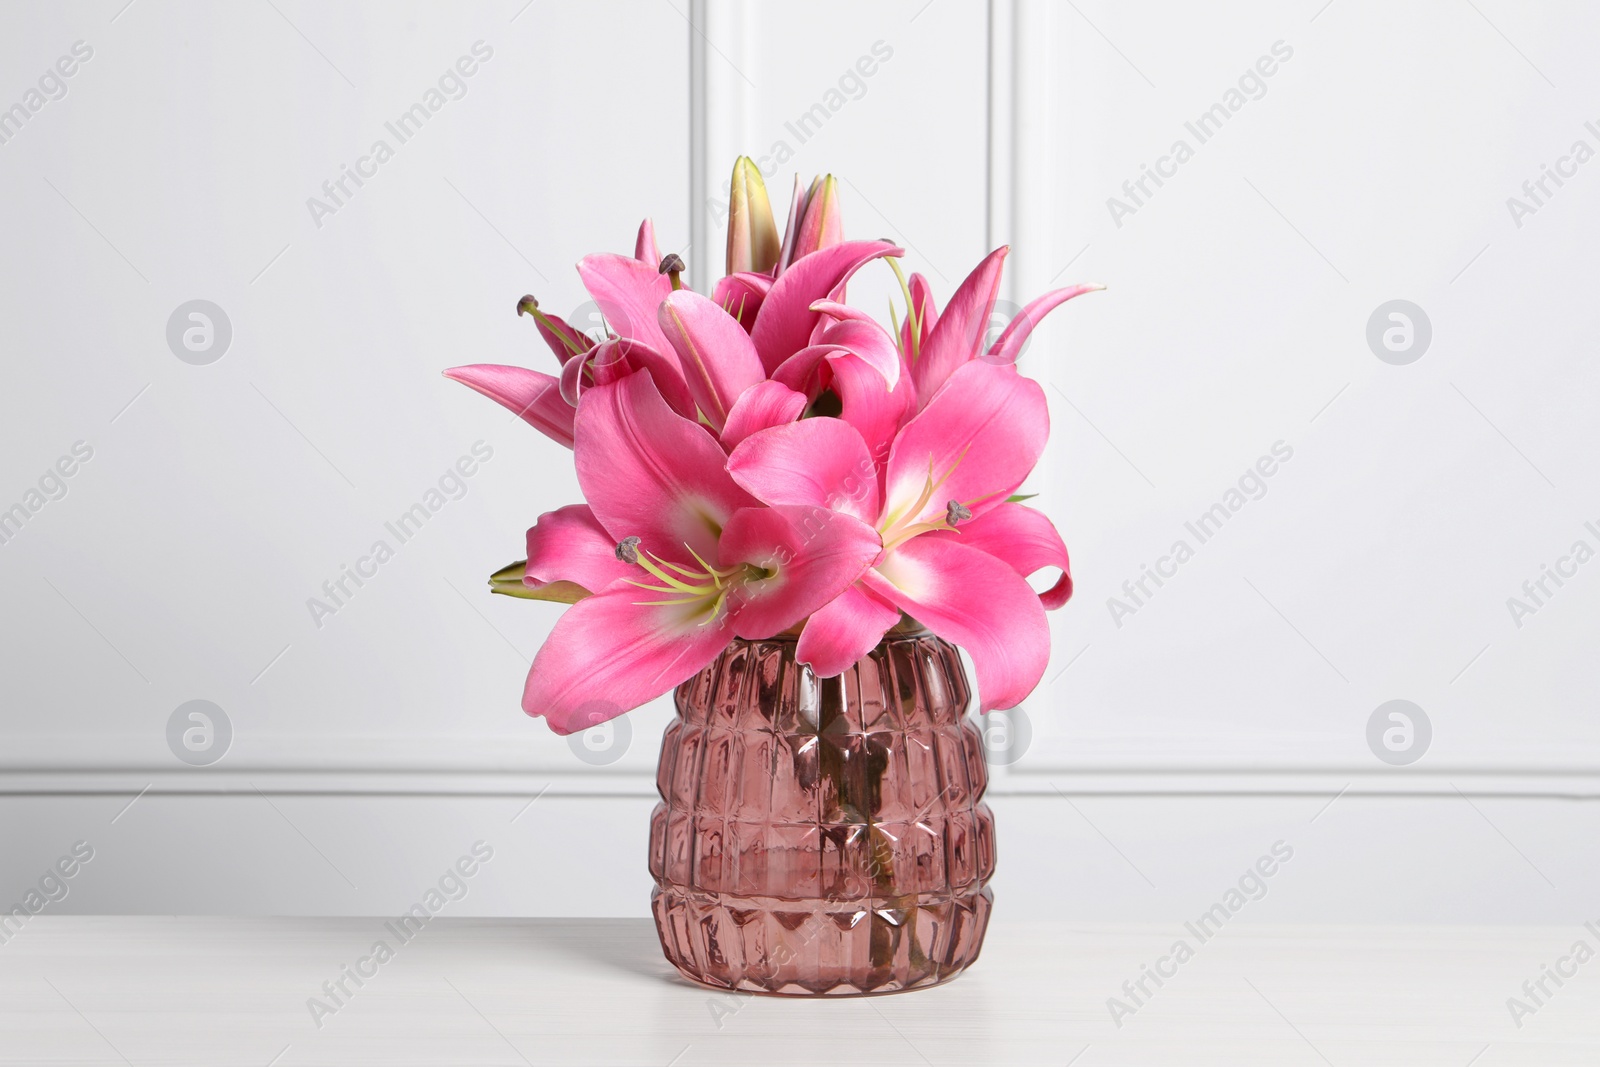 Photo of Beautiful pink lily flowers in vase on wooden table against white wall